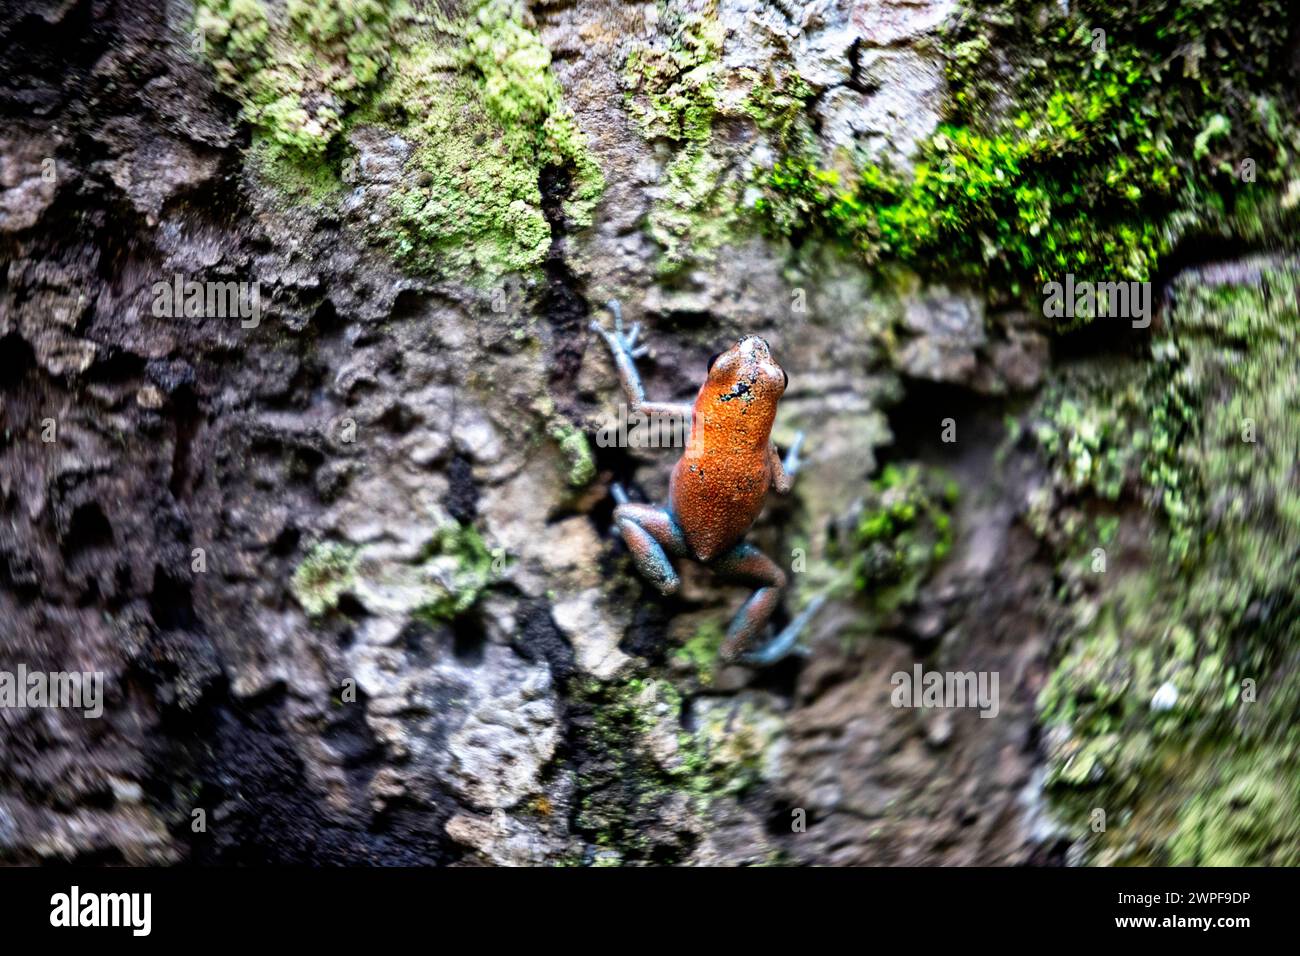 Strawberry poison frog, strawberry poison-dart frog or blue jeans poison frog (Oophaga pumilio) in n natural environment, Bocas del Toro, Panama Stock Photo